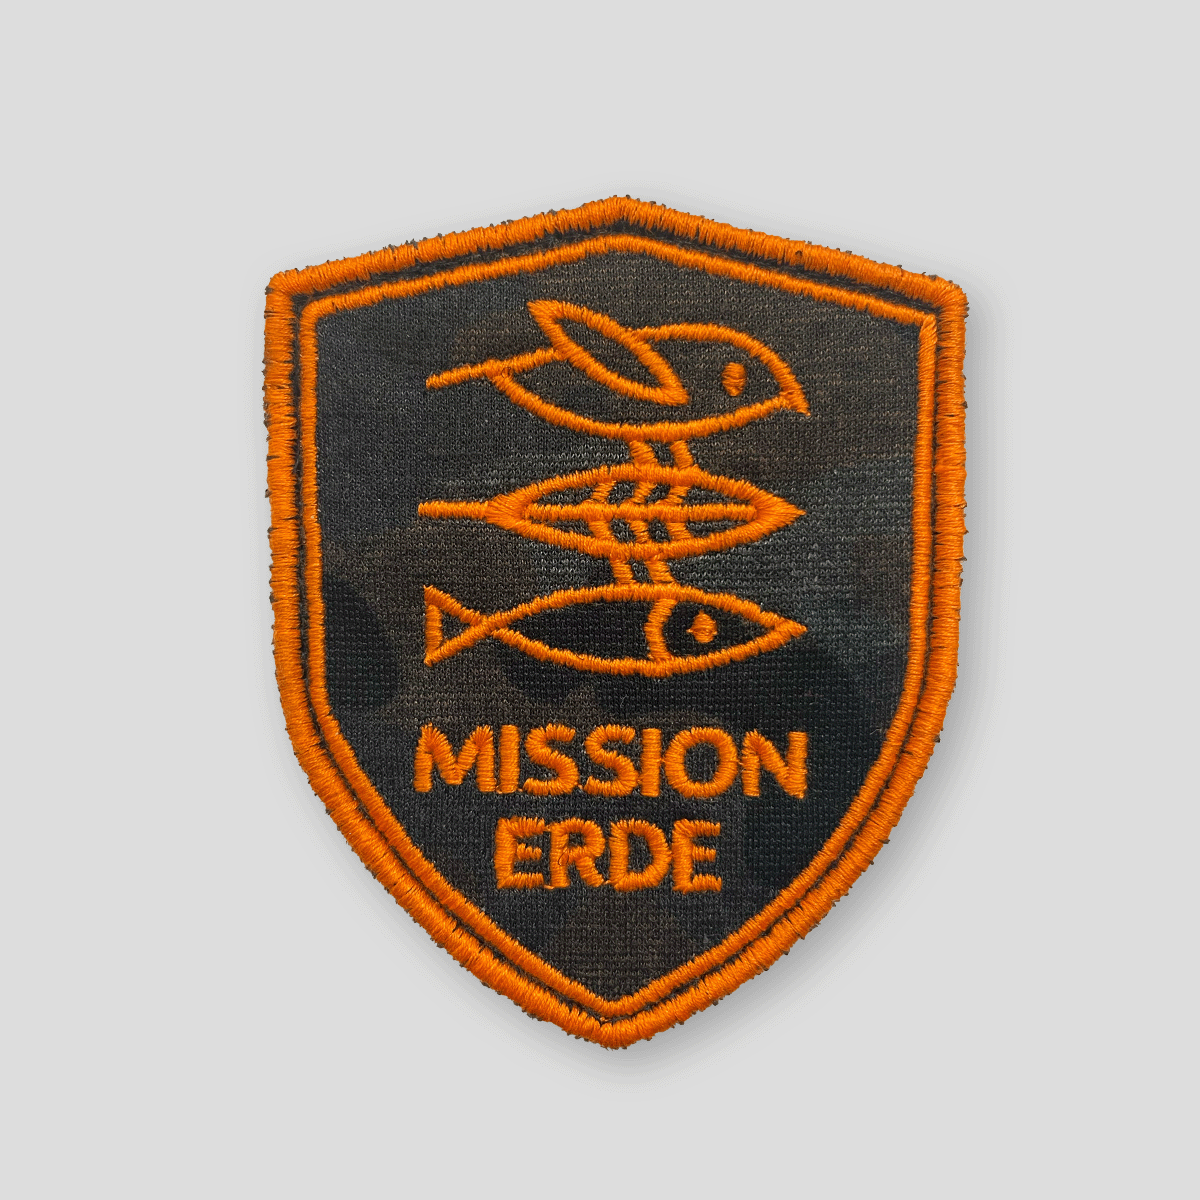 Patch "Mission Erde" Camouflage